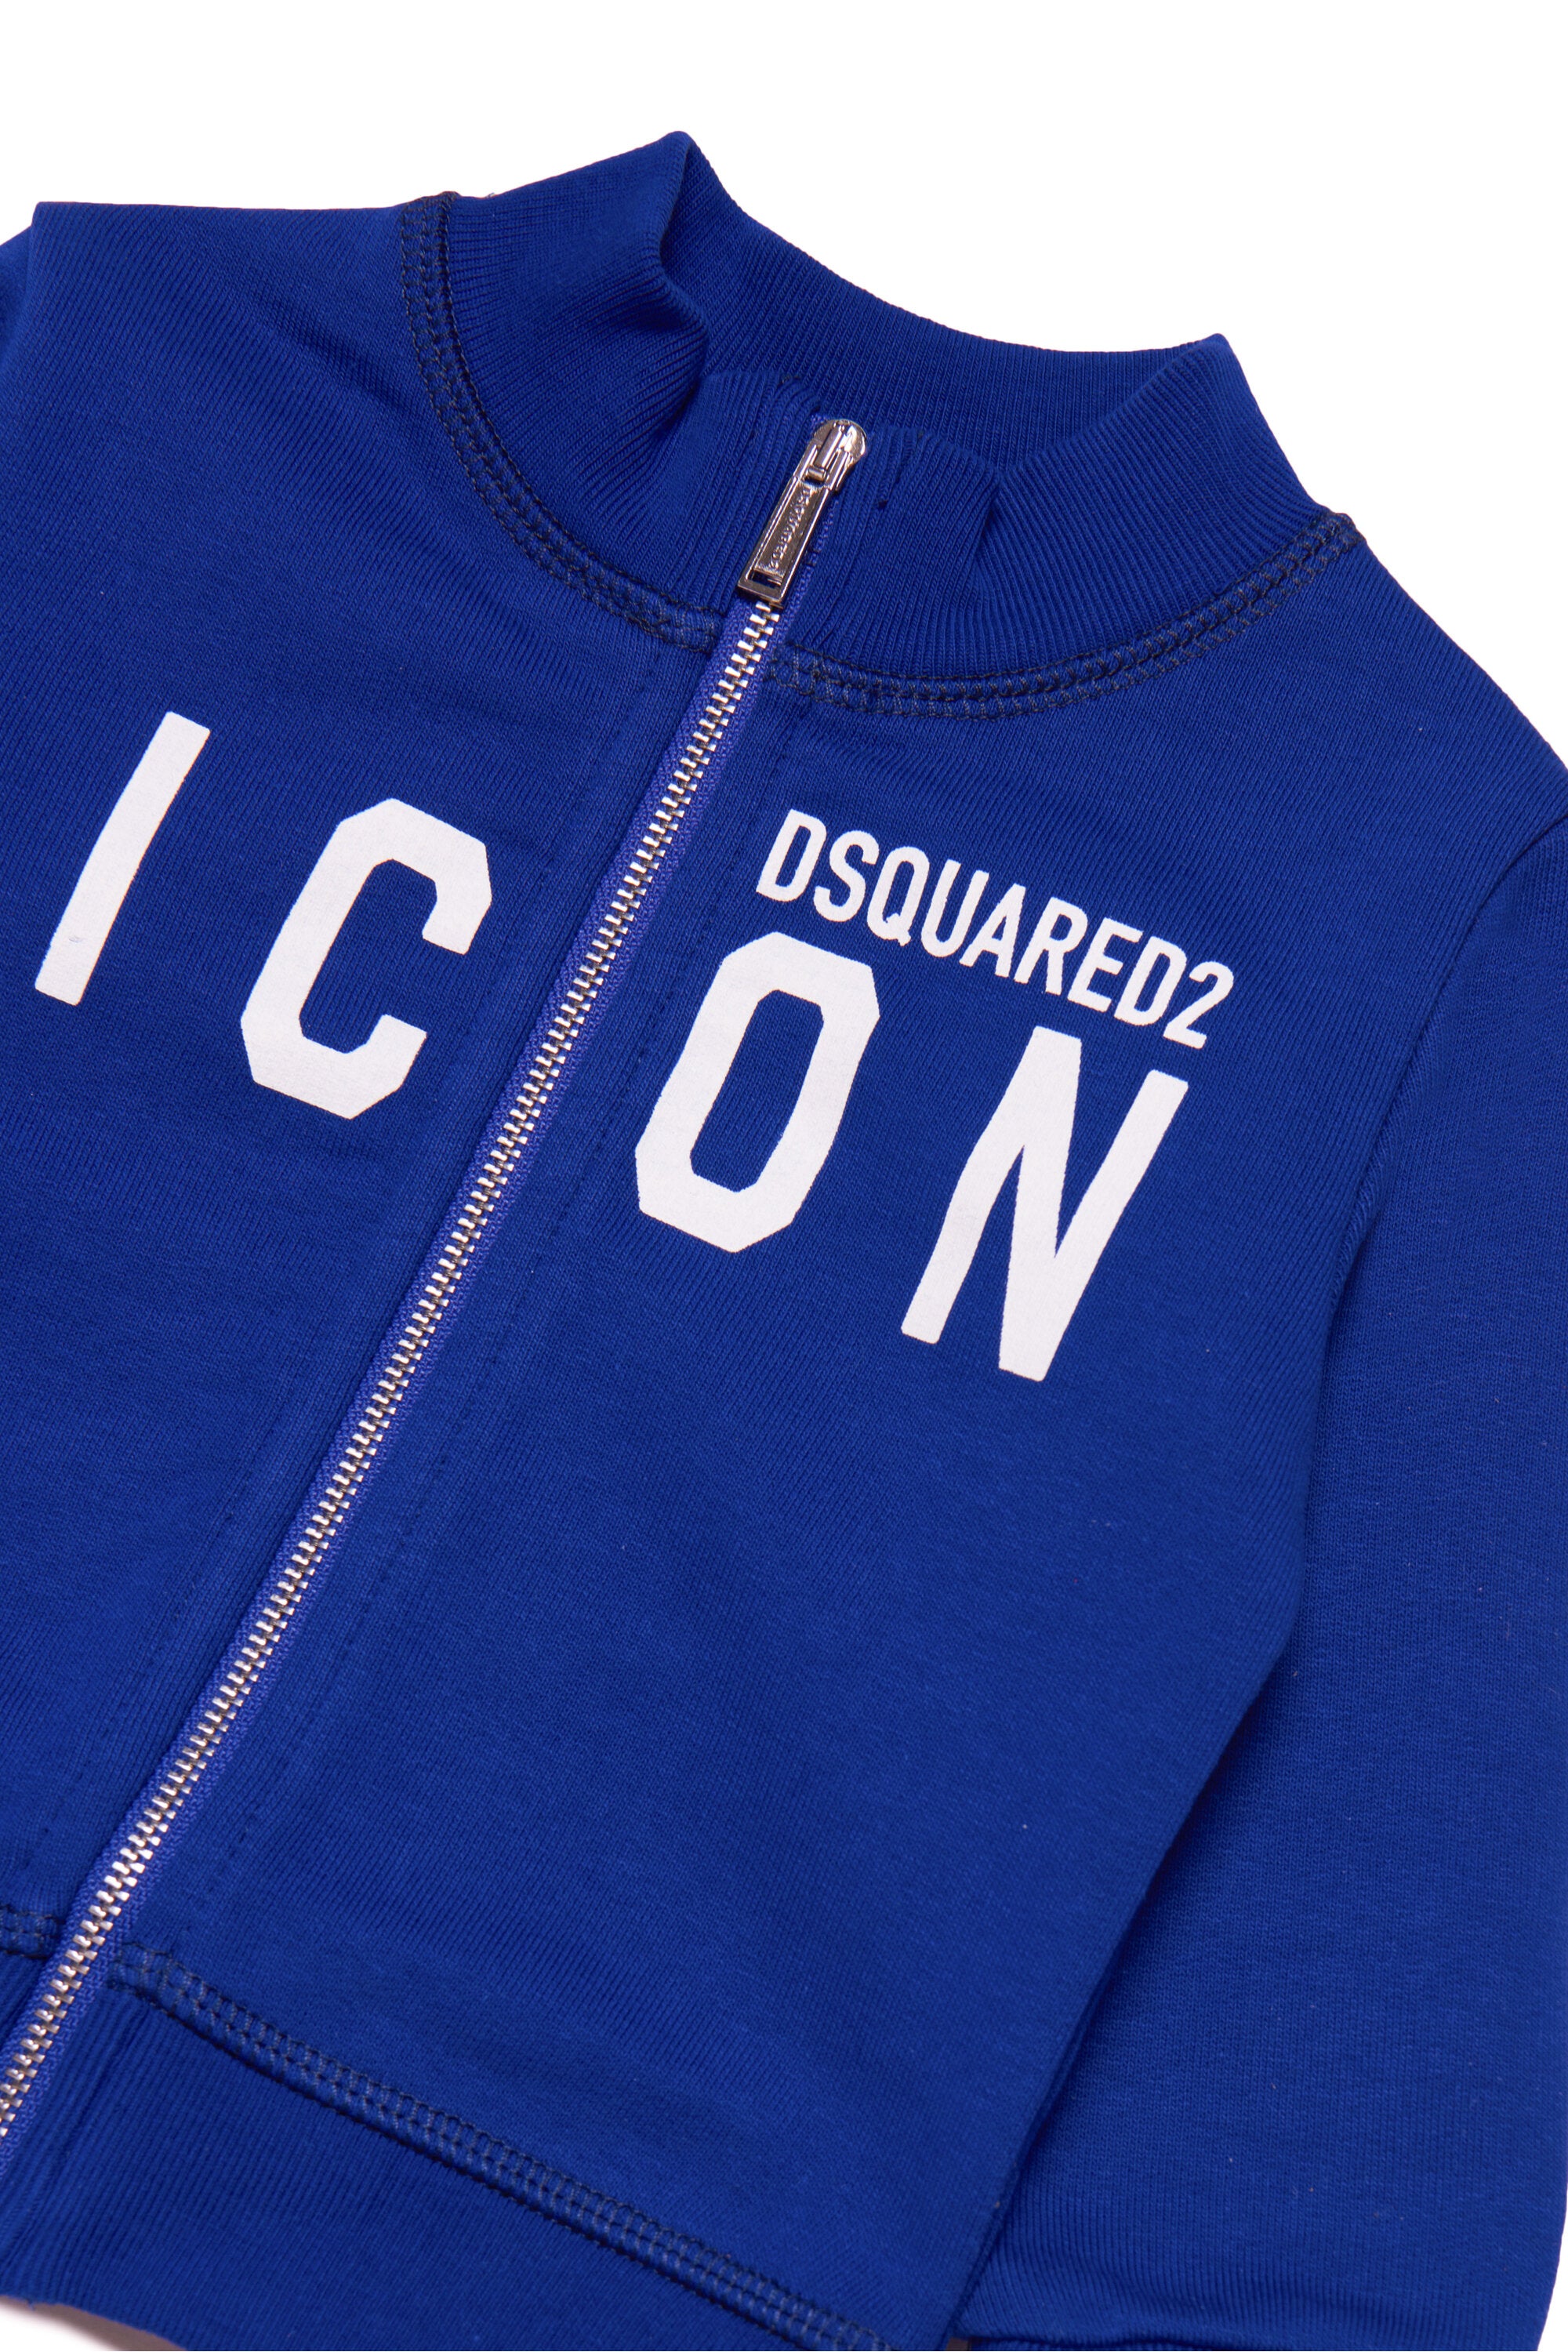 Cotton terry sweatshirt with zip and Icon logo